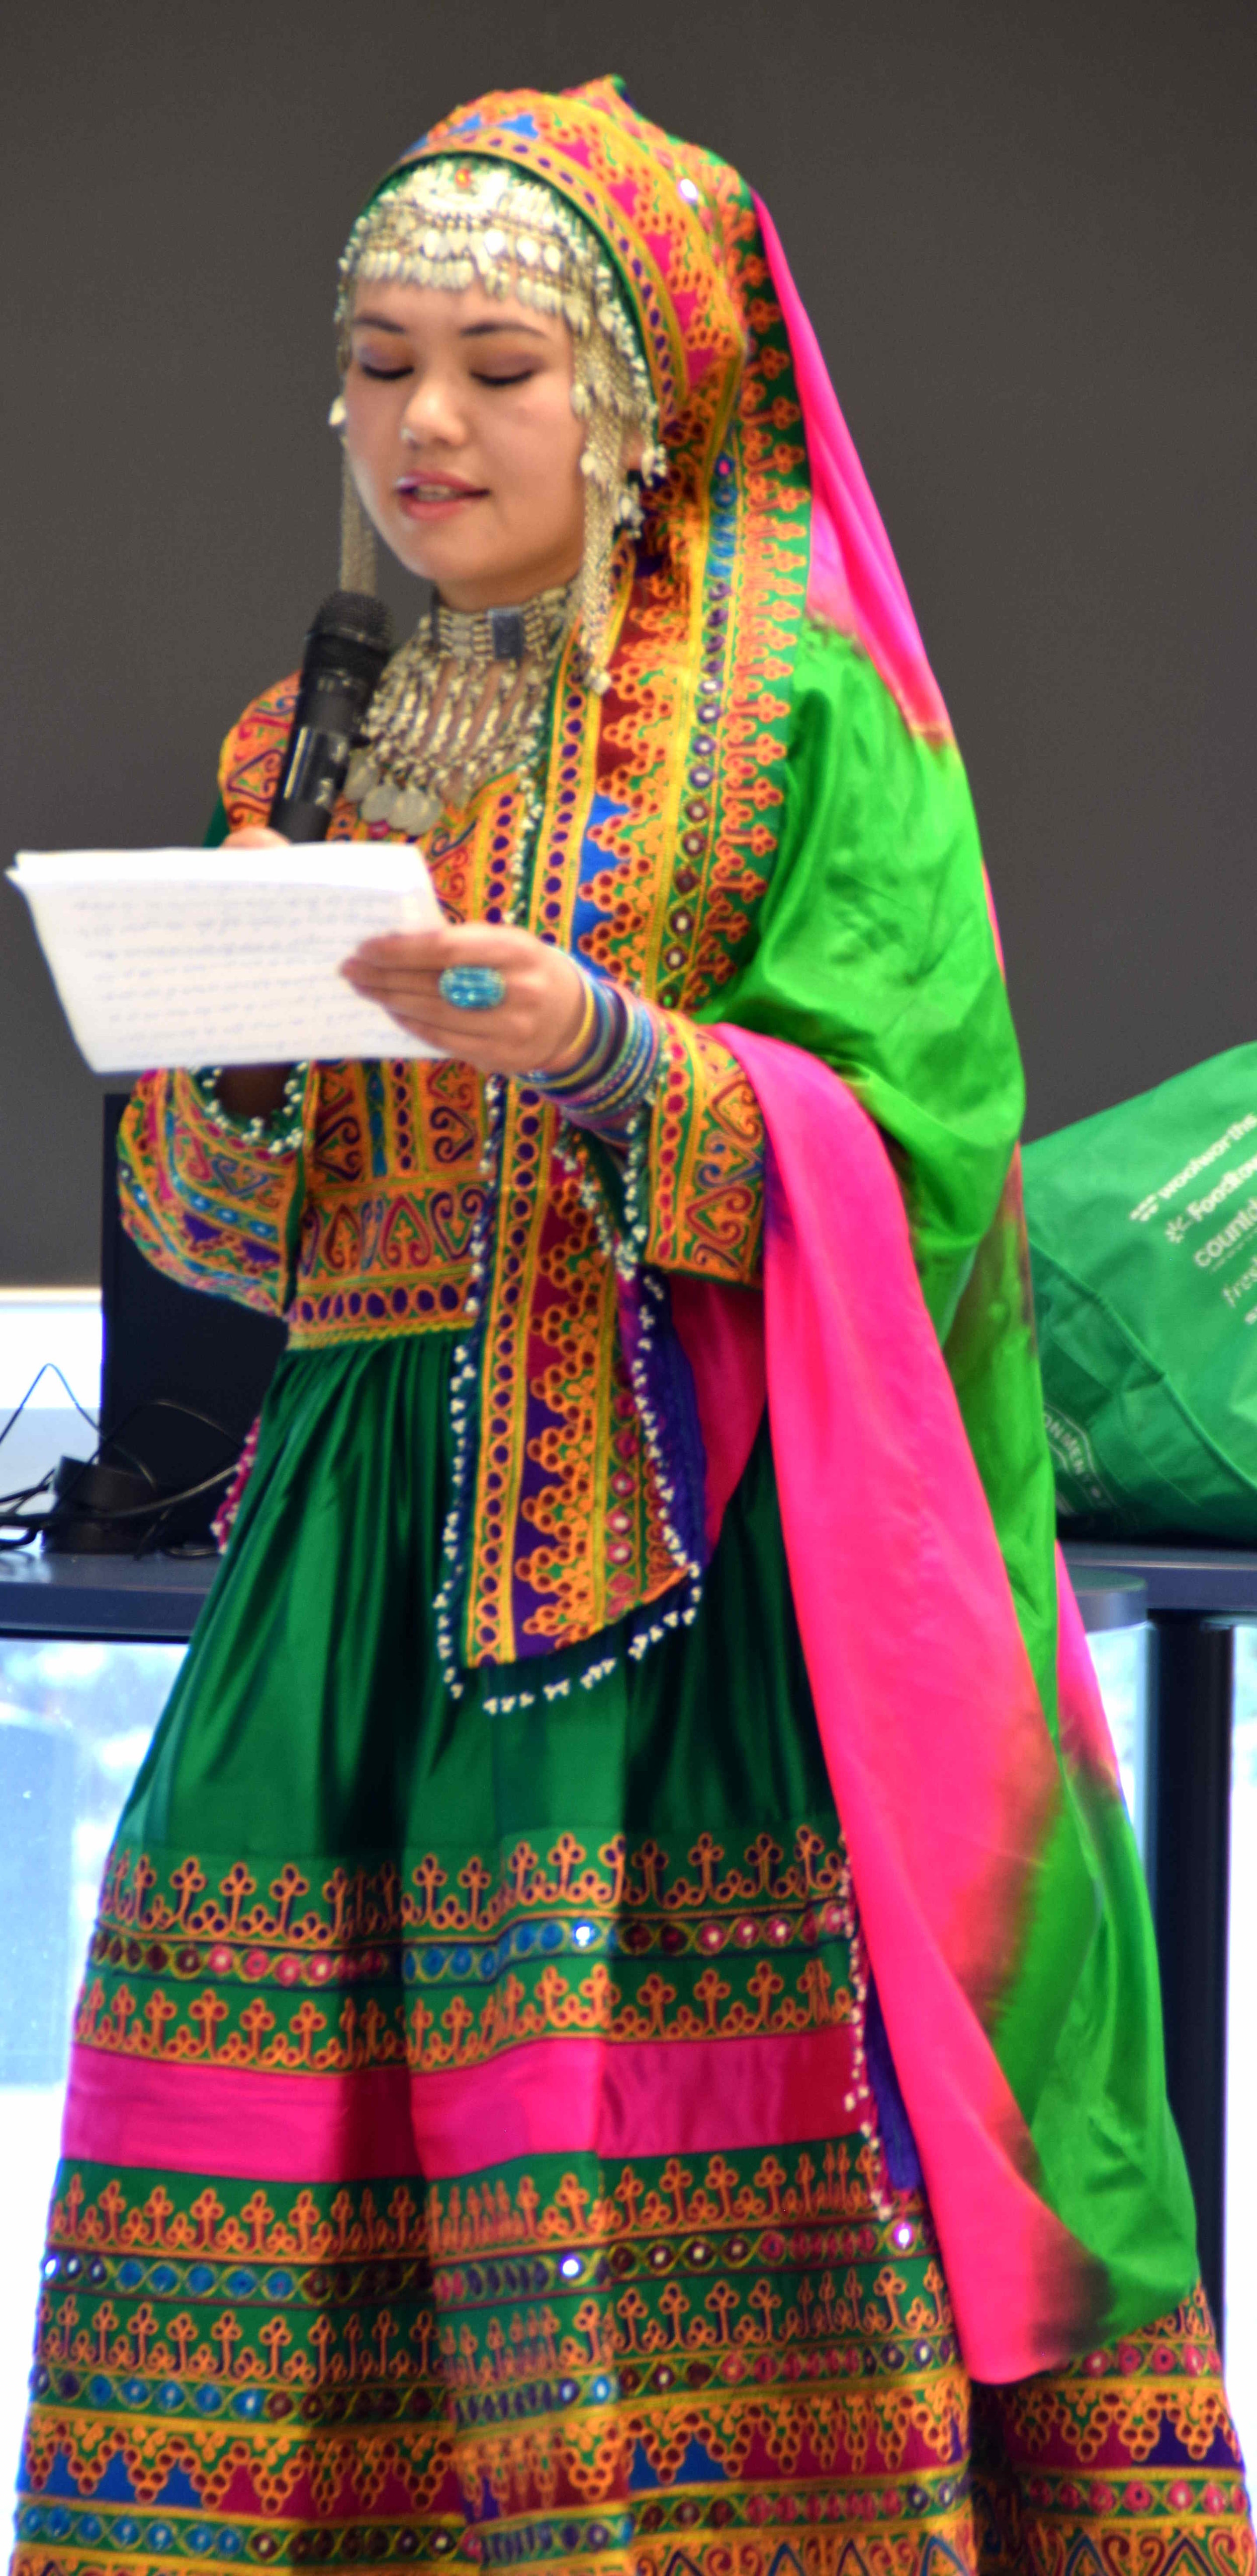  Maryam from Afghanistan addressing the gathering in Pashto, the South-Central Asian language of the Pashtuns 